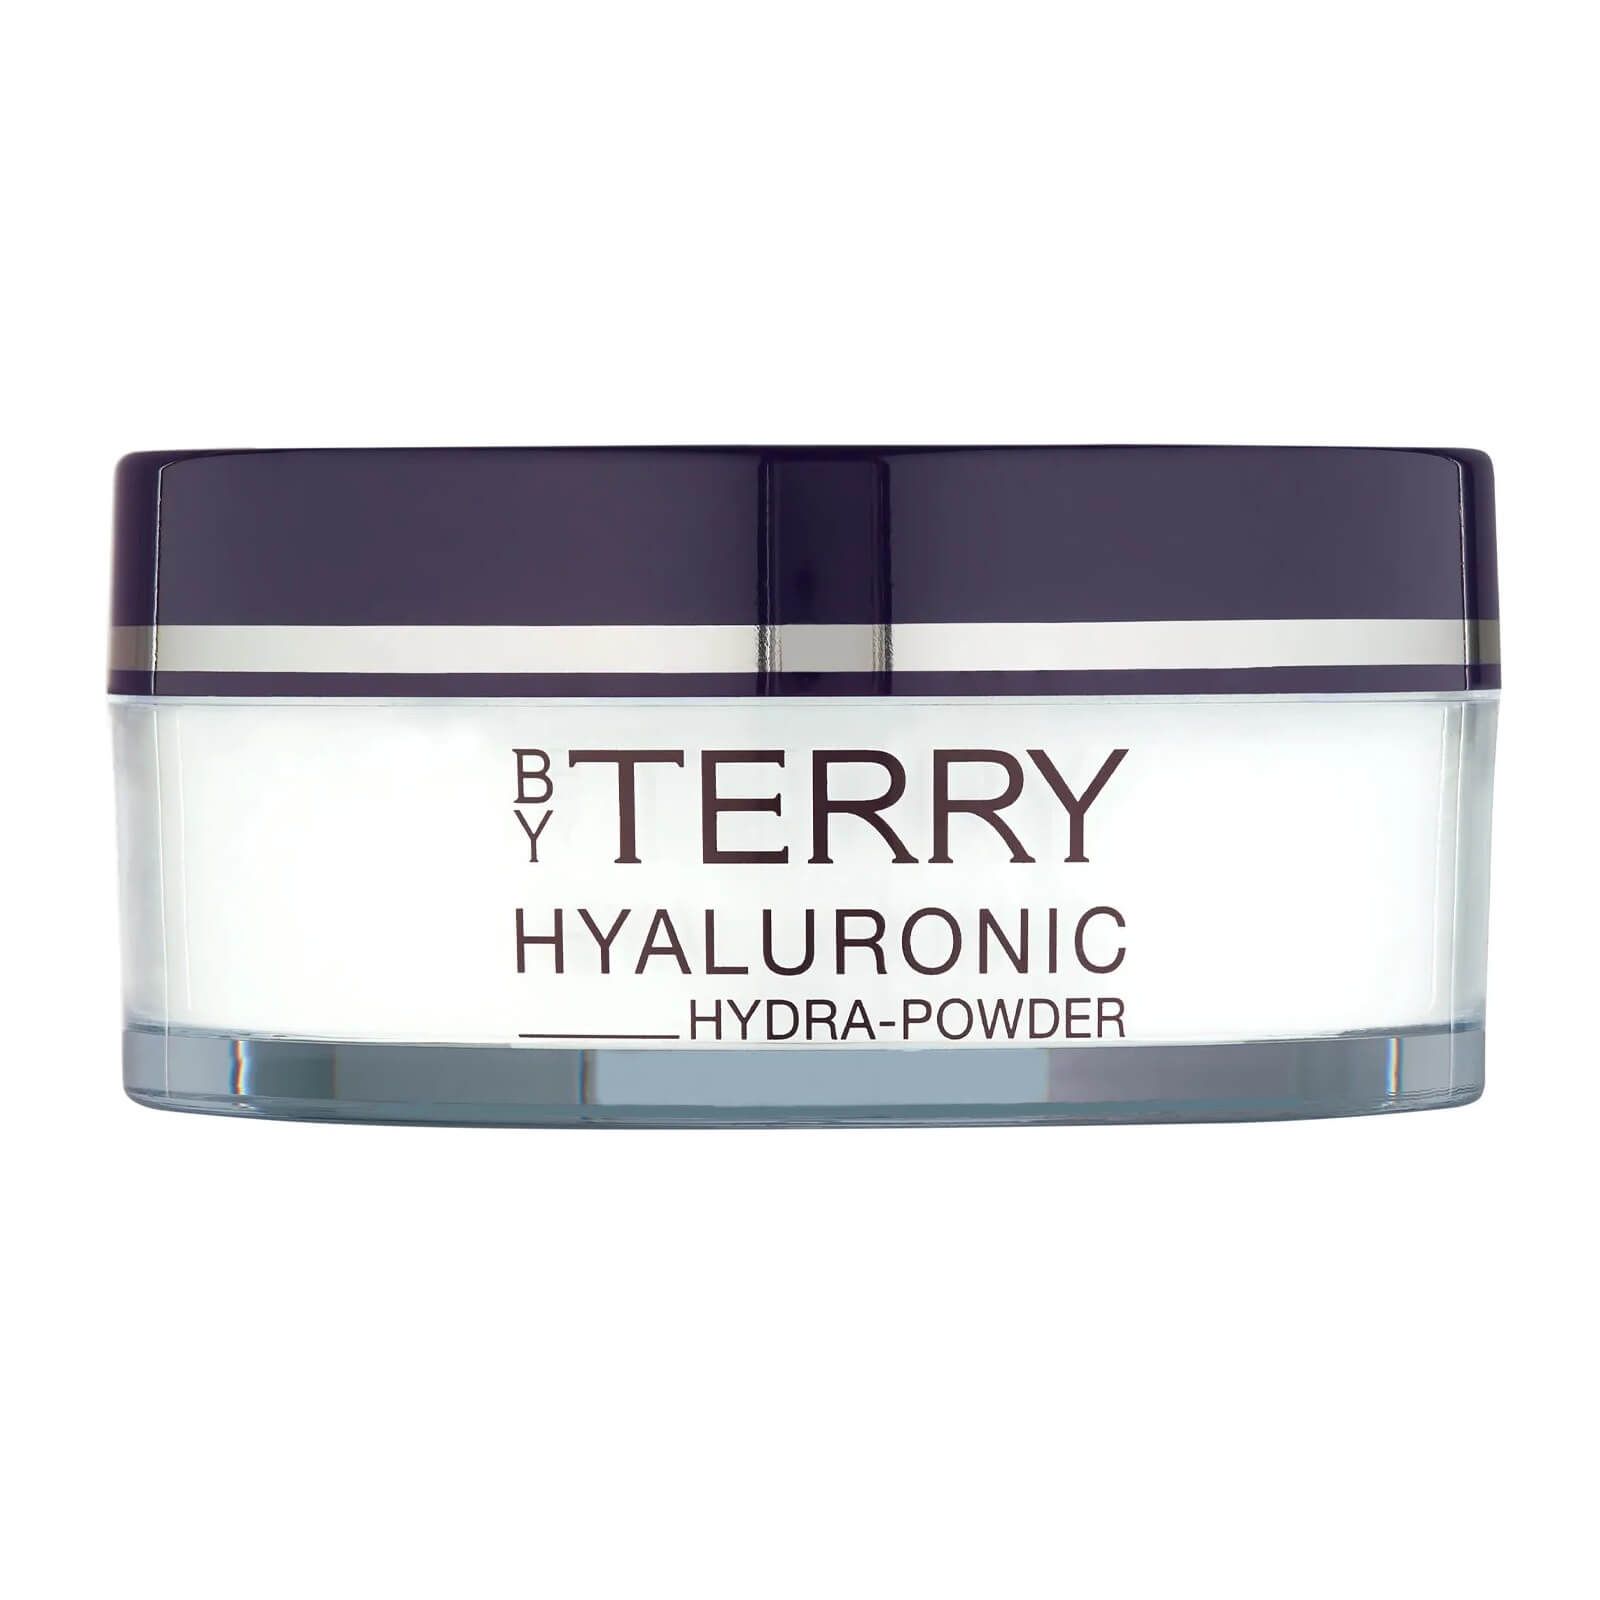 By Terry Hyaluronic Hydra-Powder 10g | Look Fantastic (UK)